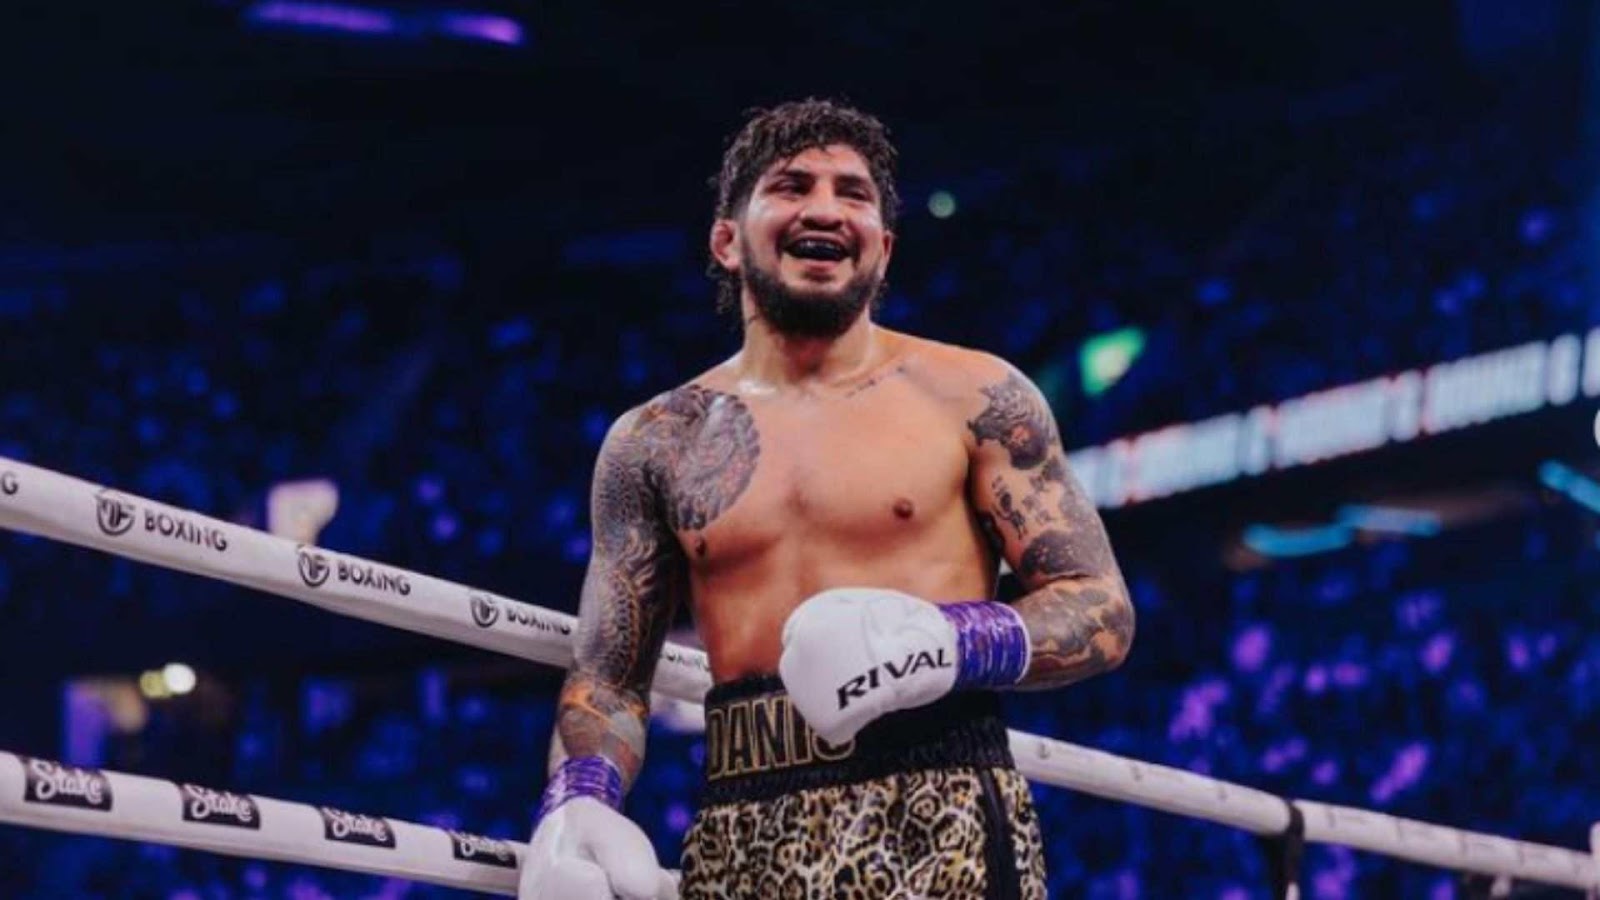 Dillon Danis Net Worth is 2 Million, How He earn from his Boxing